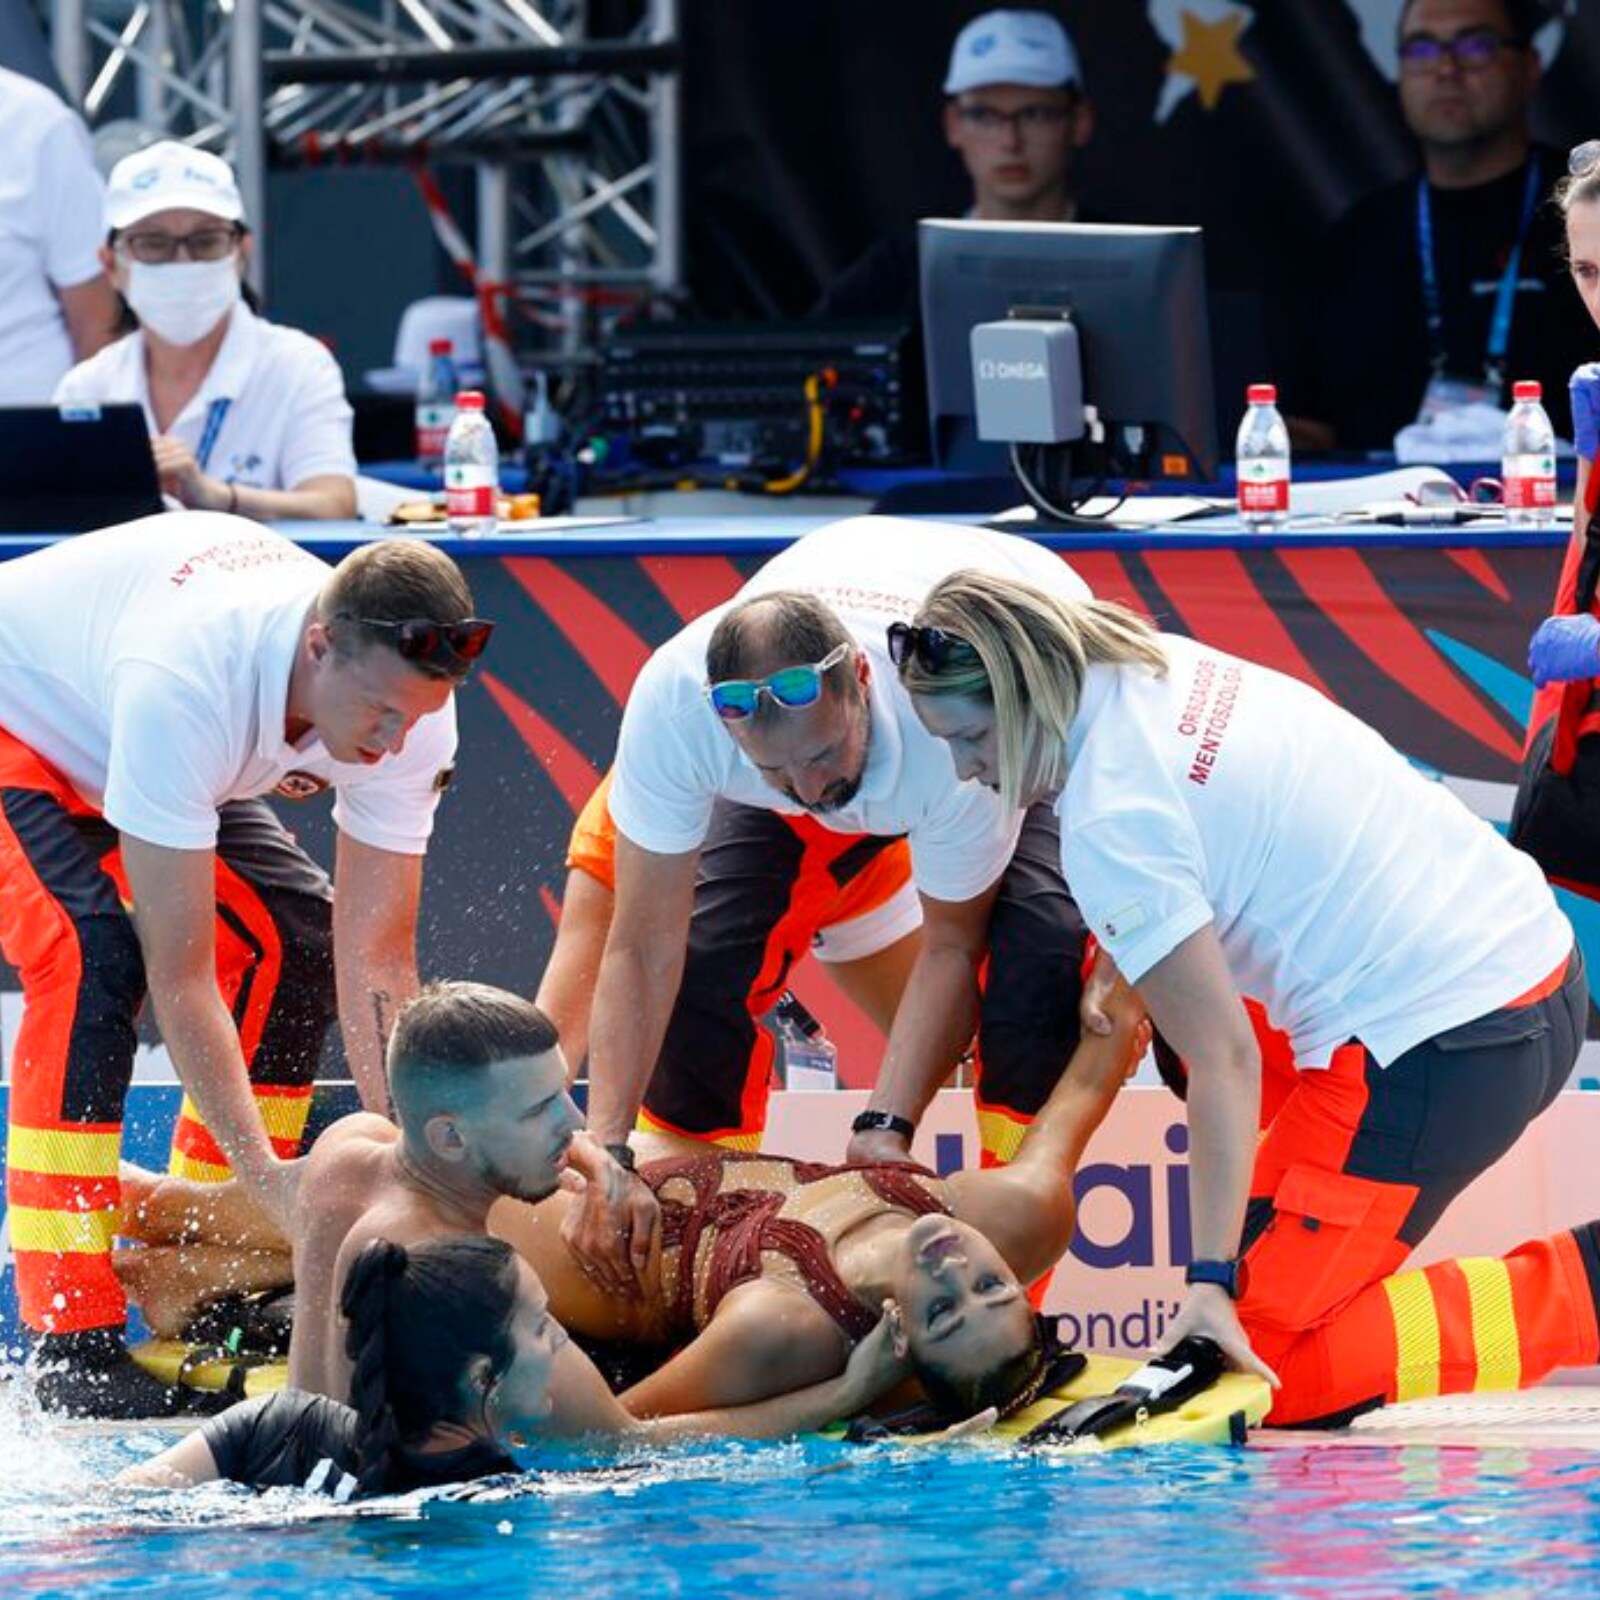 Coach Who Saved Fainting US Swimmer Reveals What Made Her Take the Plunge